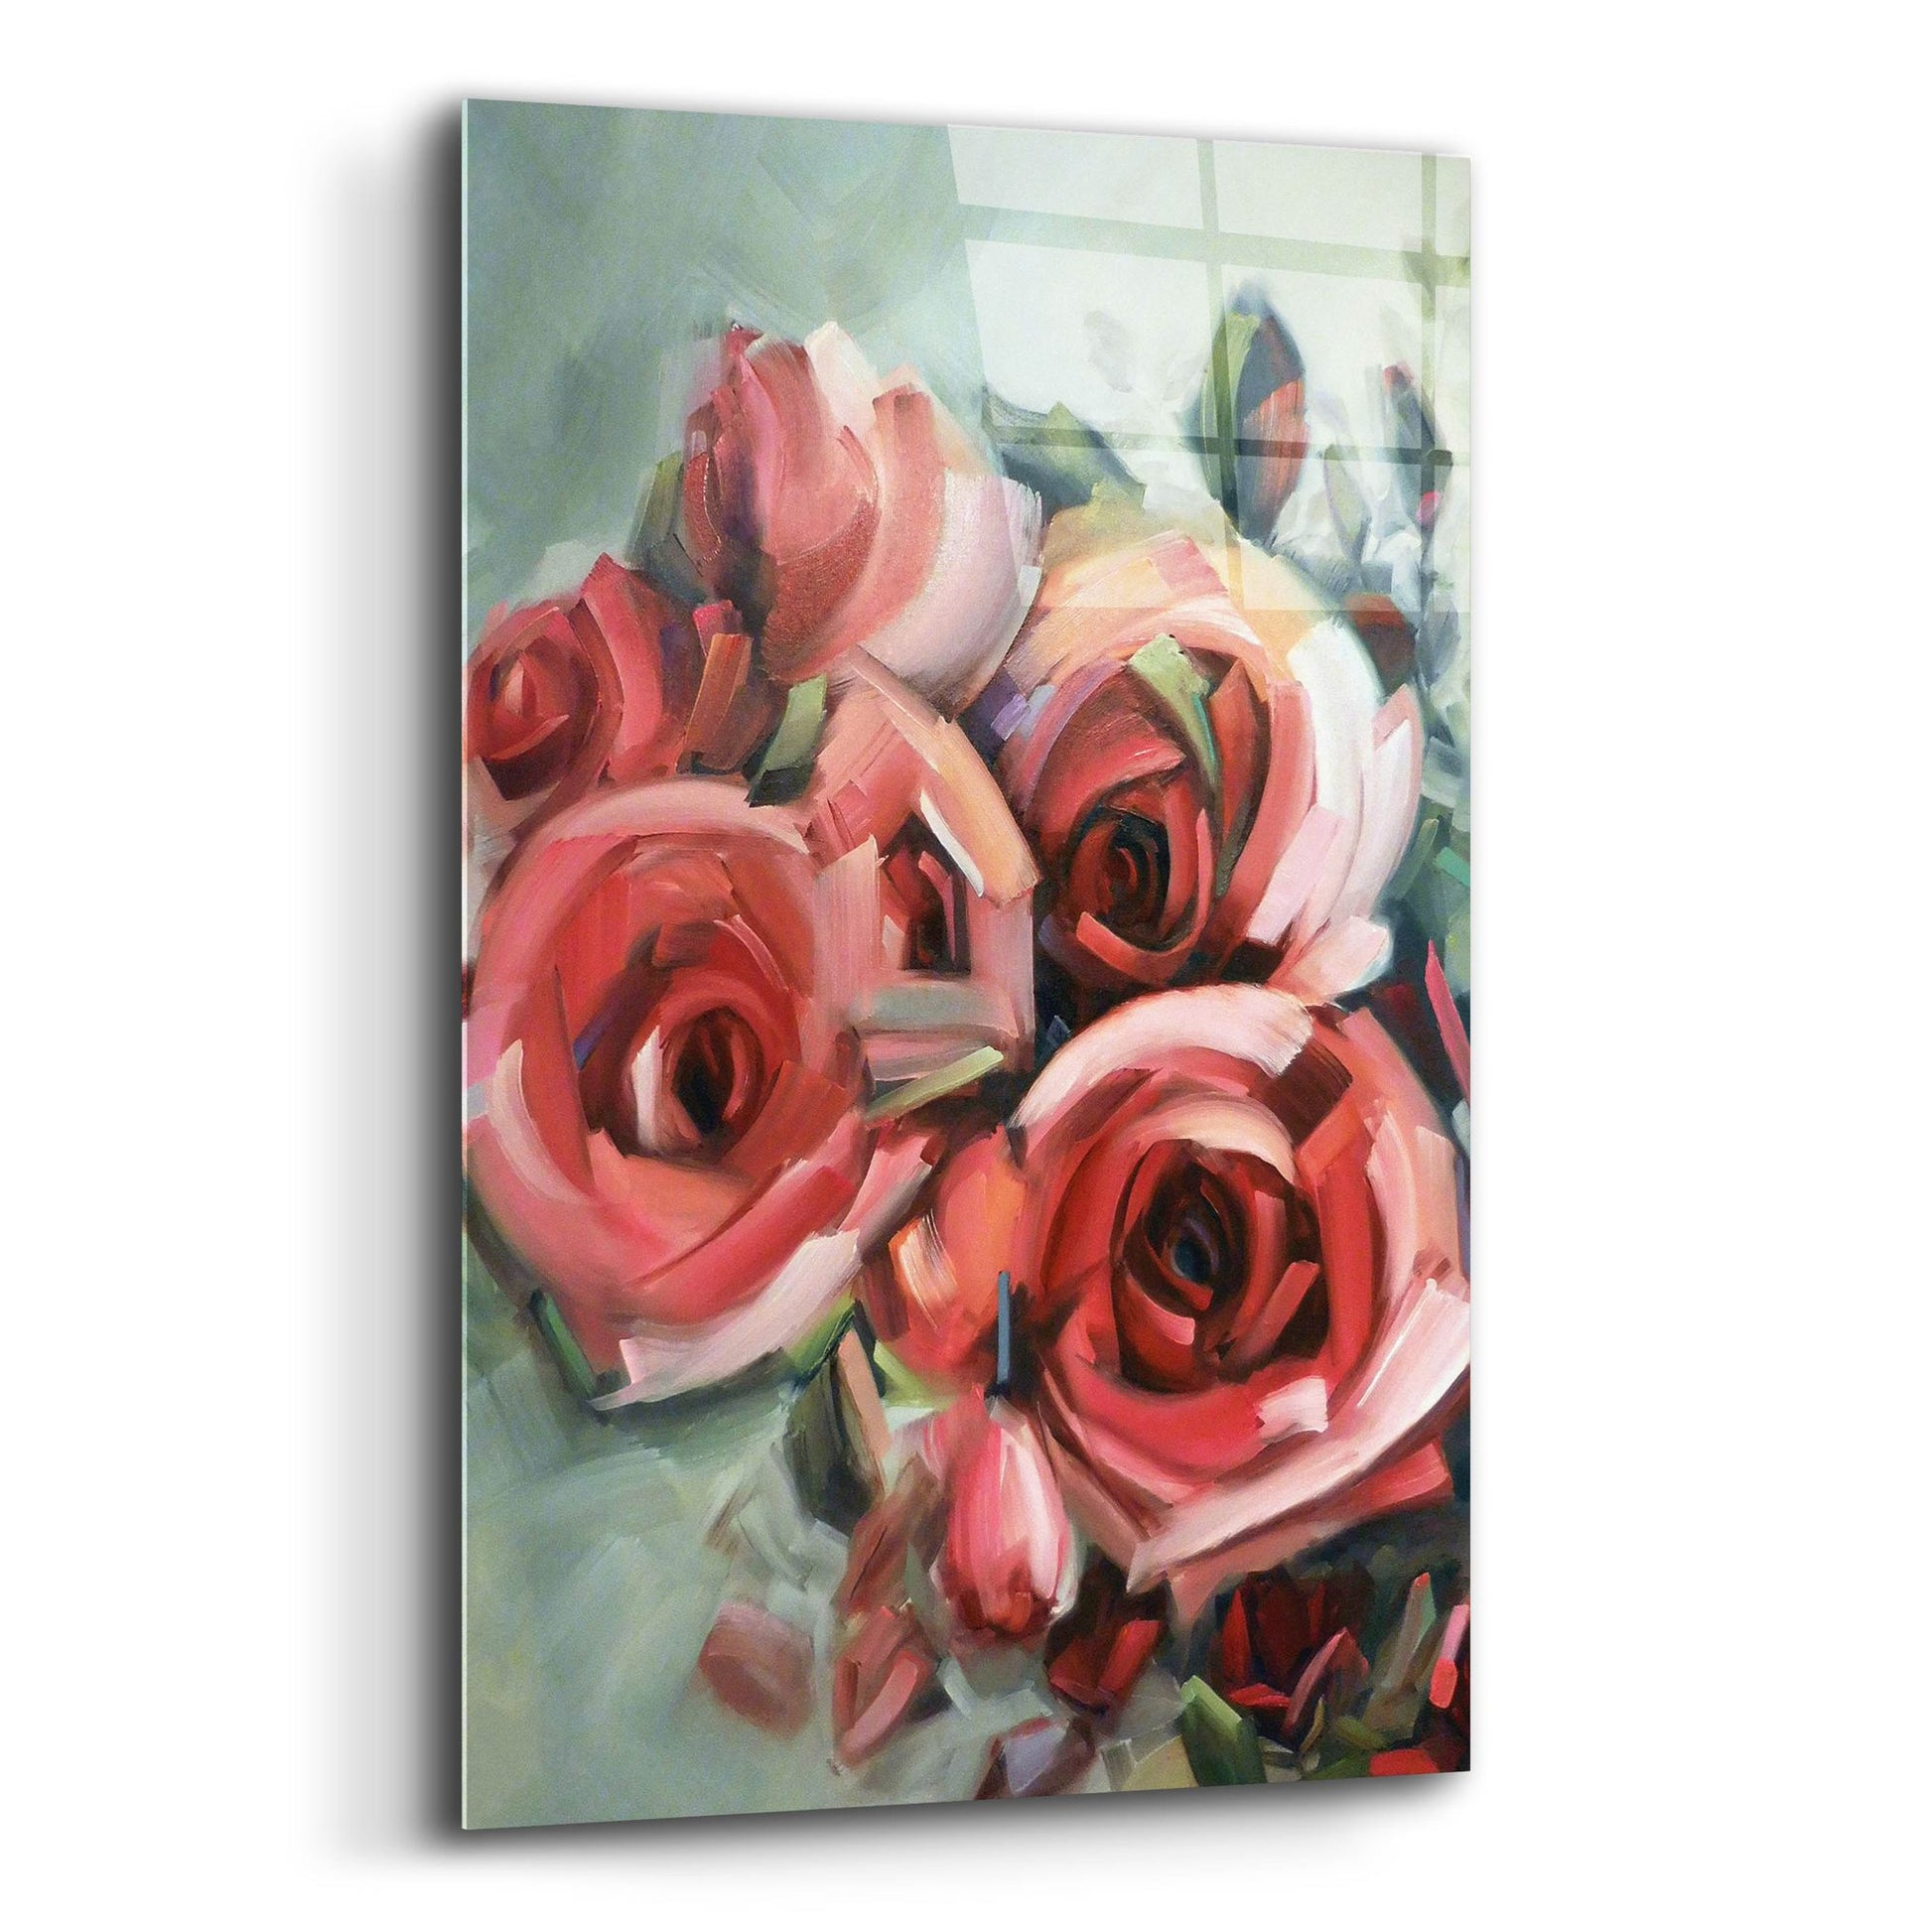 Epic Art 'Amid Scent Of Roses' by Holly Van Hart, Acrylic Glass Wall Art,12x16